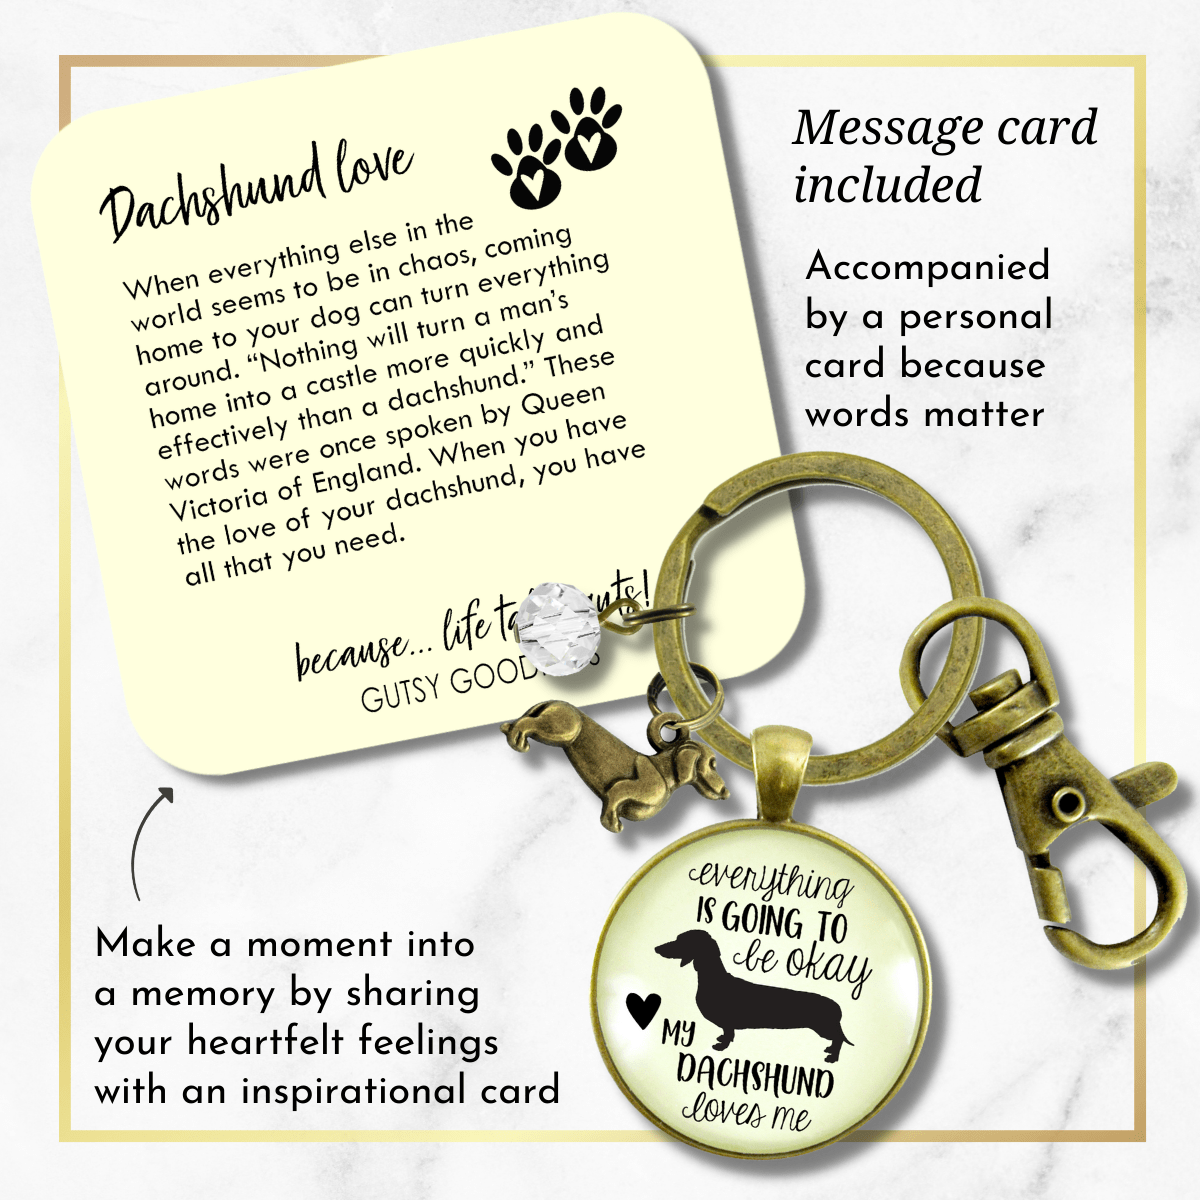 Dachshund Keychain Everything is Going to Be Okay My Dachshund Loves Me Dog Mom Jewelry Gift - Gutsy Goodness Handmade Jewelry;Dachshund Keychain Everything Is Going To Be Okay My Dachshund Loves Me Dog Mom Jewelry Gift - Gutsy Goodness Handmade Jewelry Gifts